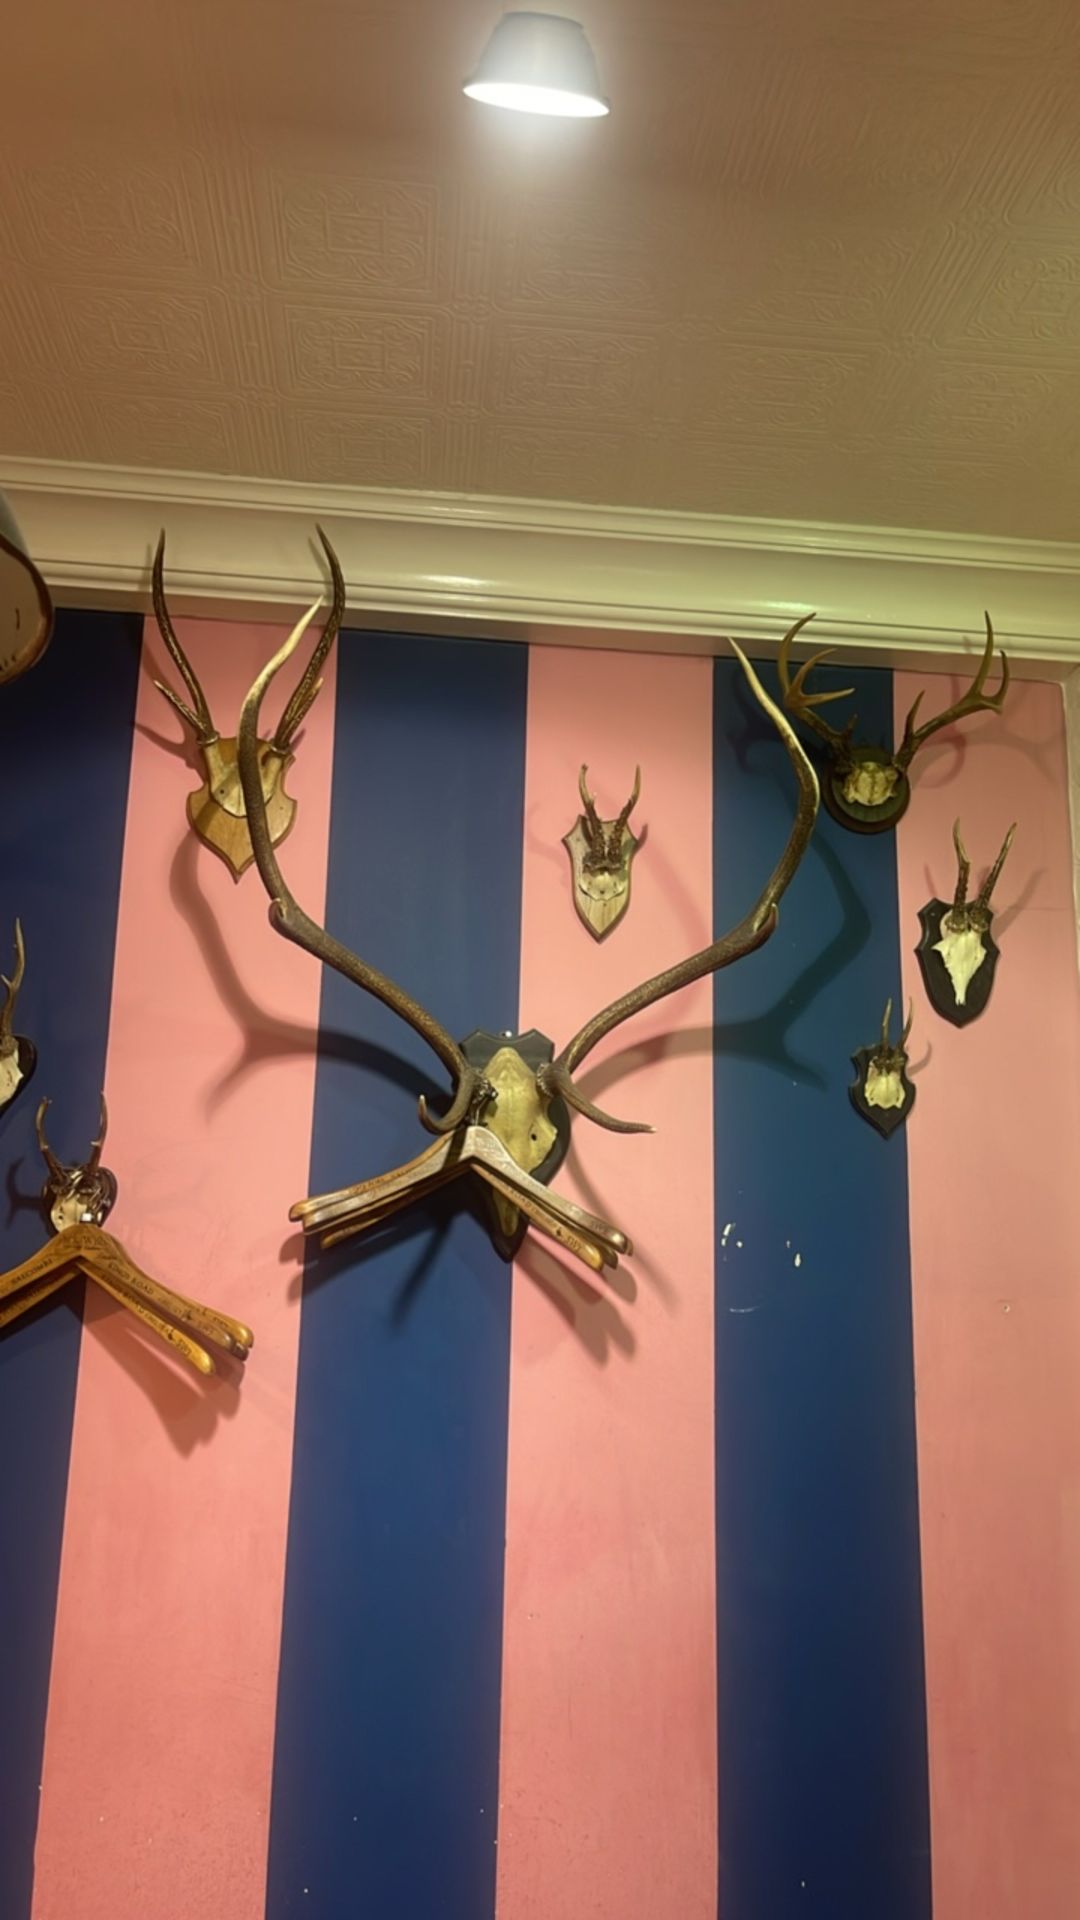 Collection Of Antlers - Image 5 of 5